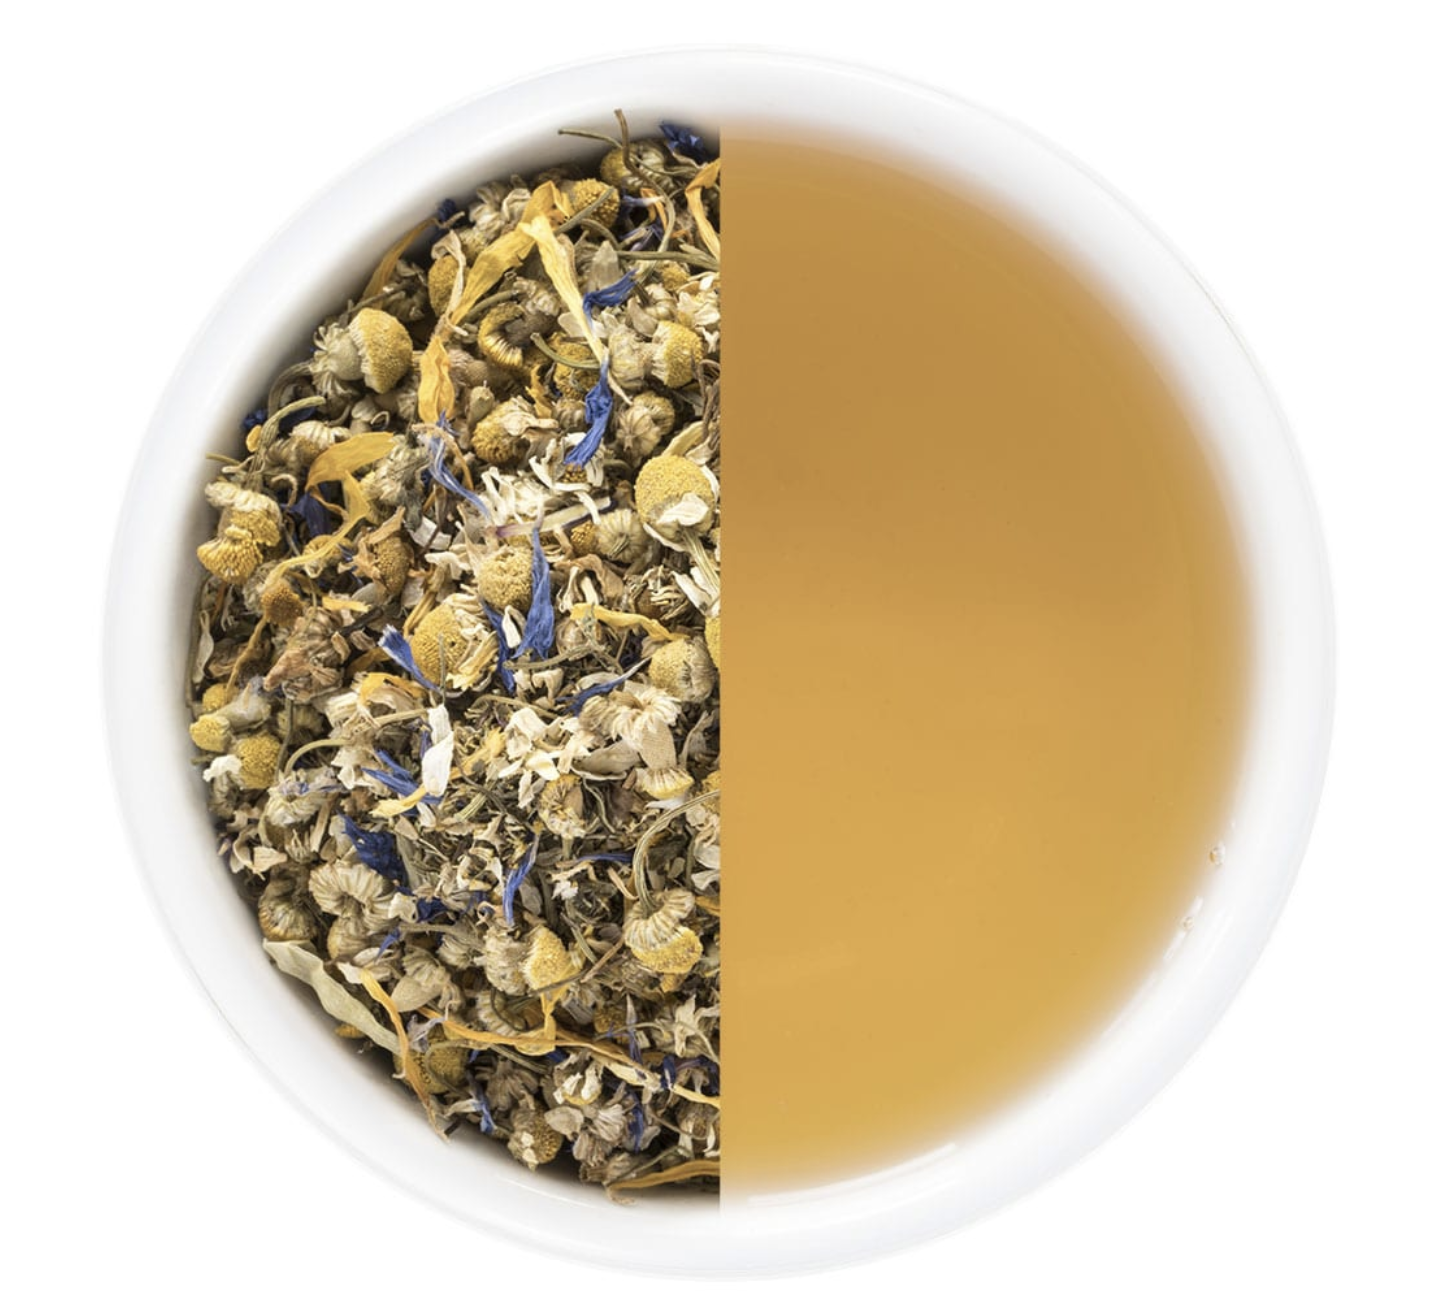 Monista Tea Co loose leaf camomile tea: fragrant, soothing, and perfect for a calming cup of organic bliss.